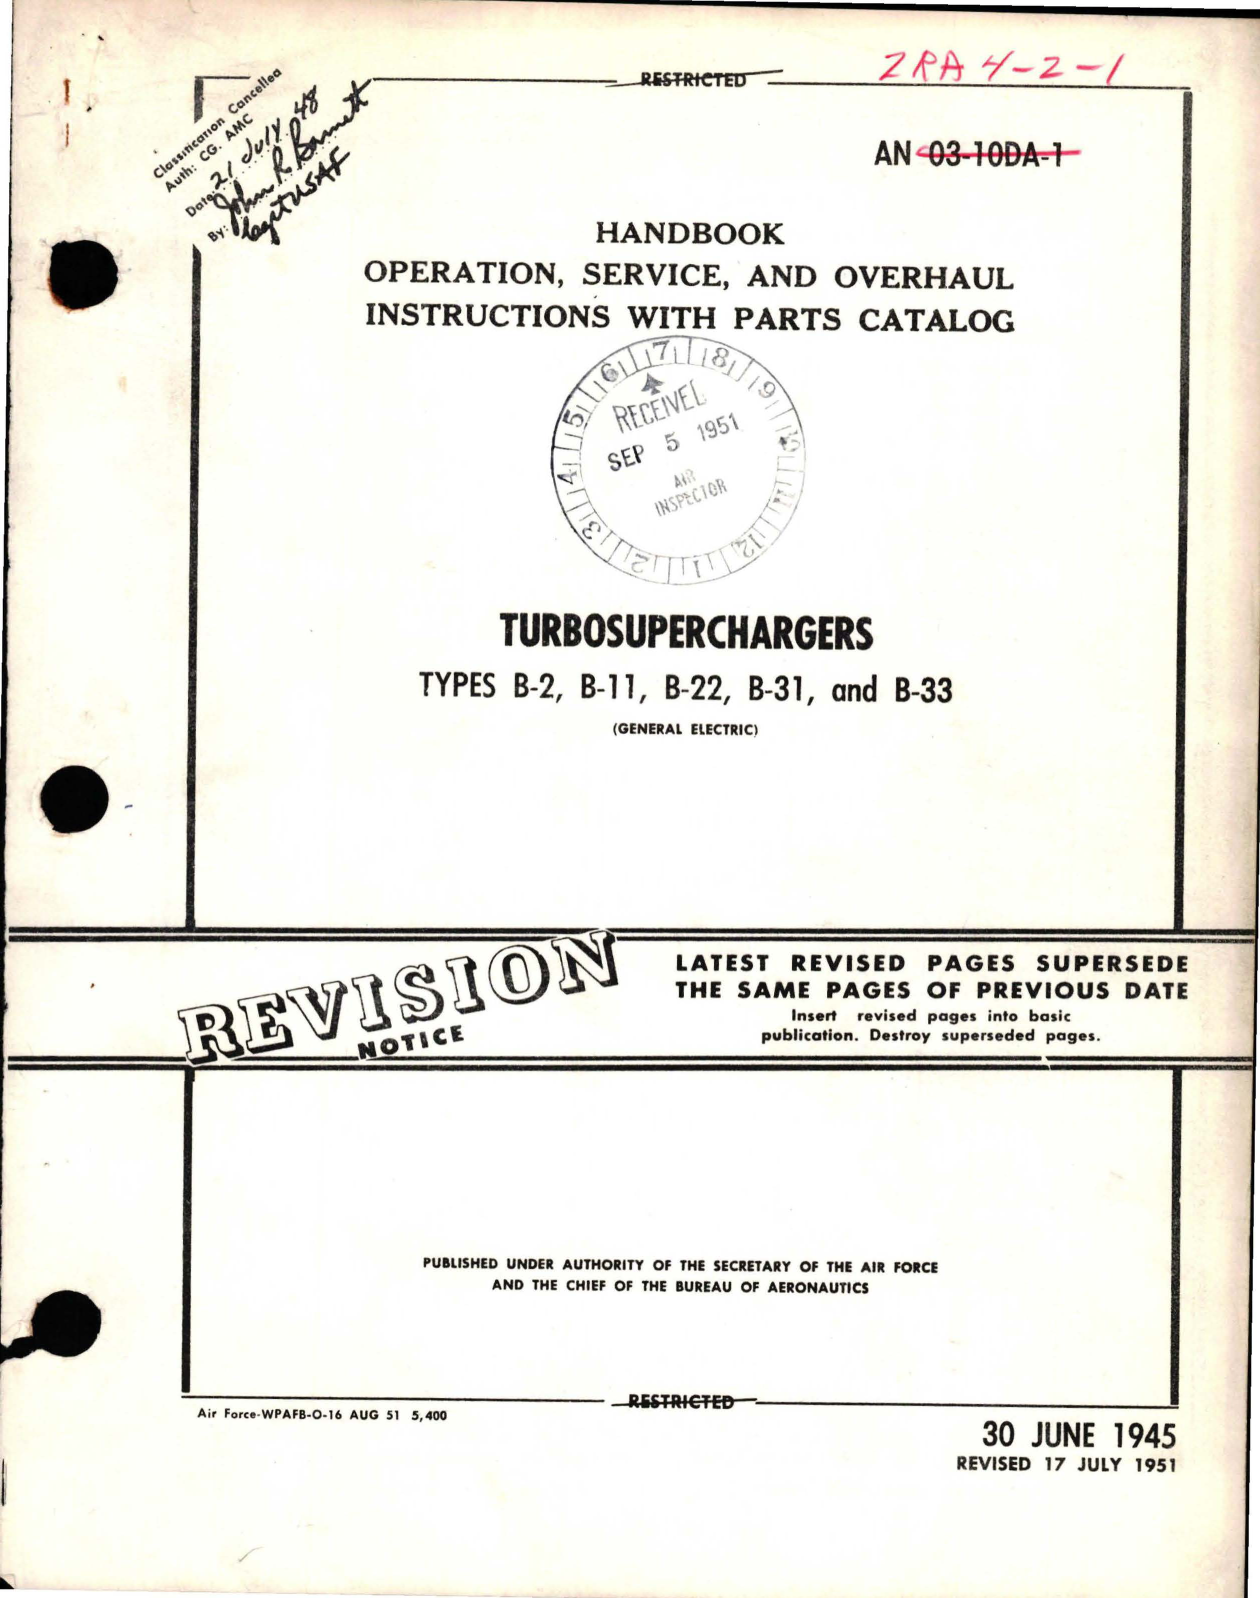 Sample page 1 from AirCorps Library document: Operation, Service and Overhaul Instructions with Parts Catalog for Turbosuperchargers - Types B-2, B-11, B-22, B-31, and B-33 